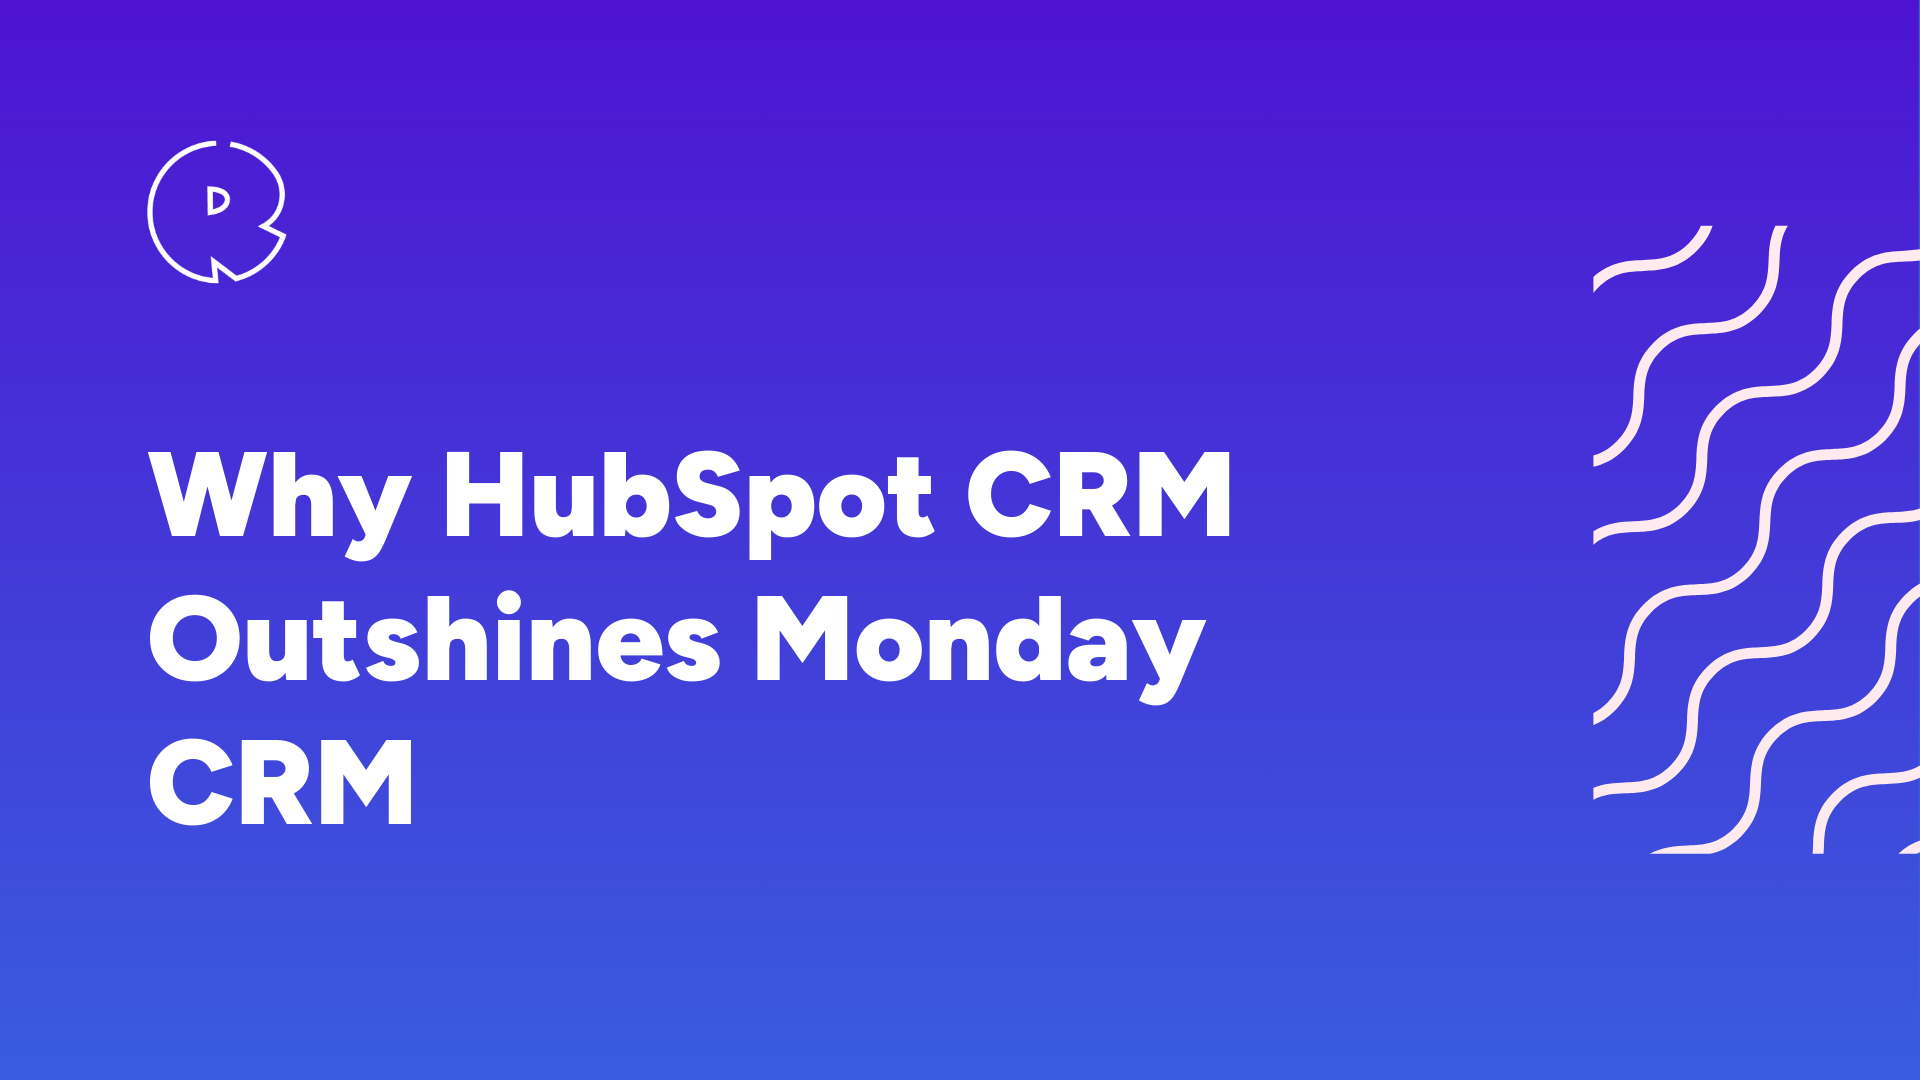 Why HubSpot CRM Outshines Monday CRM